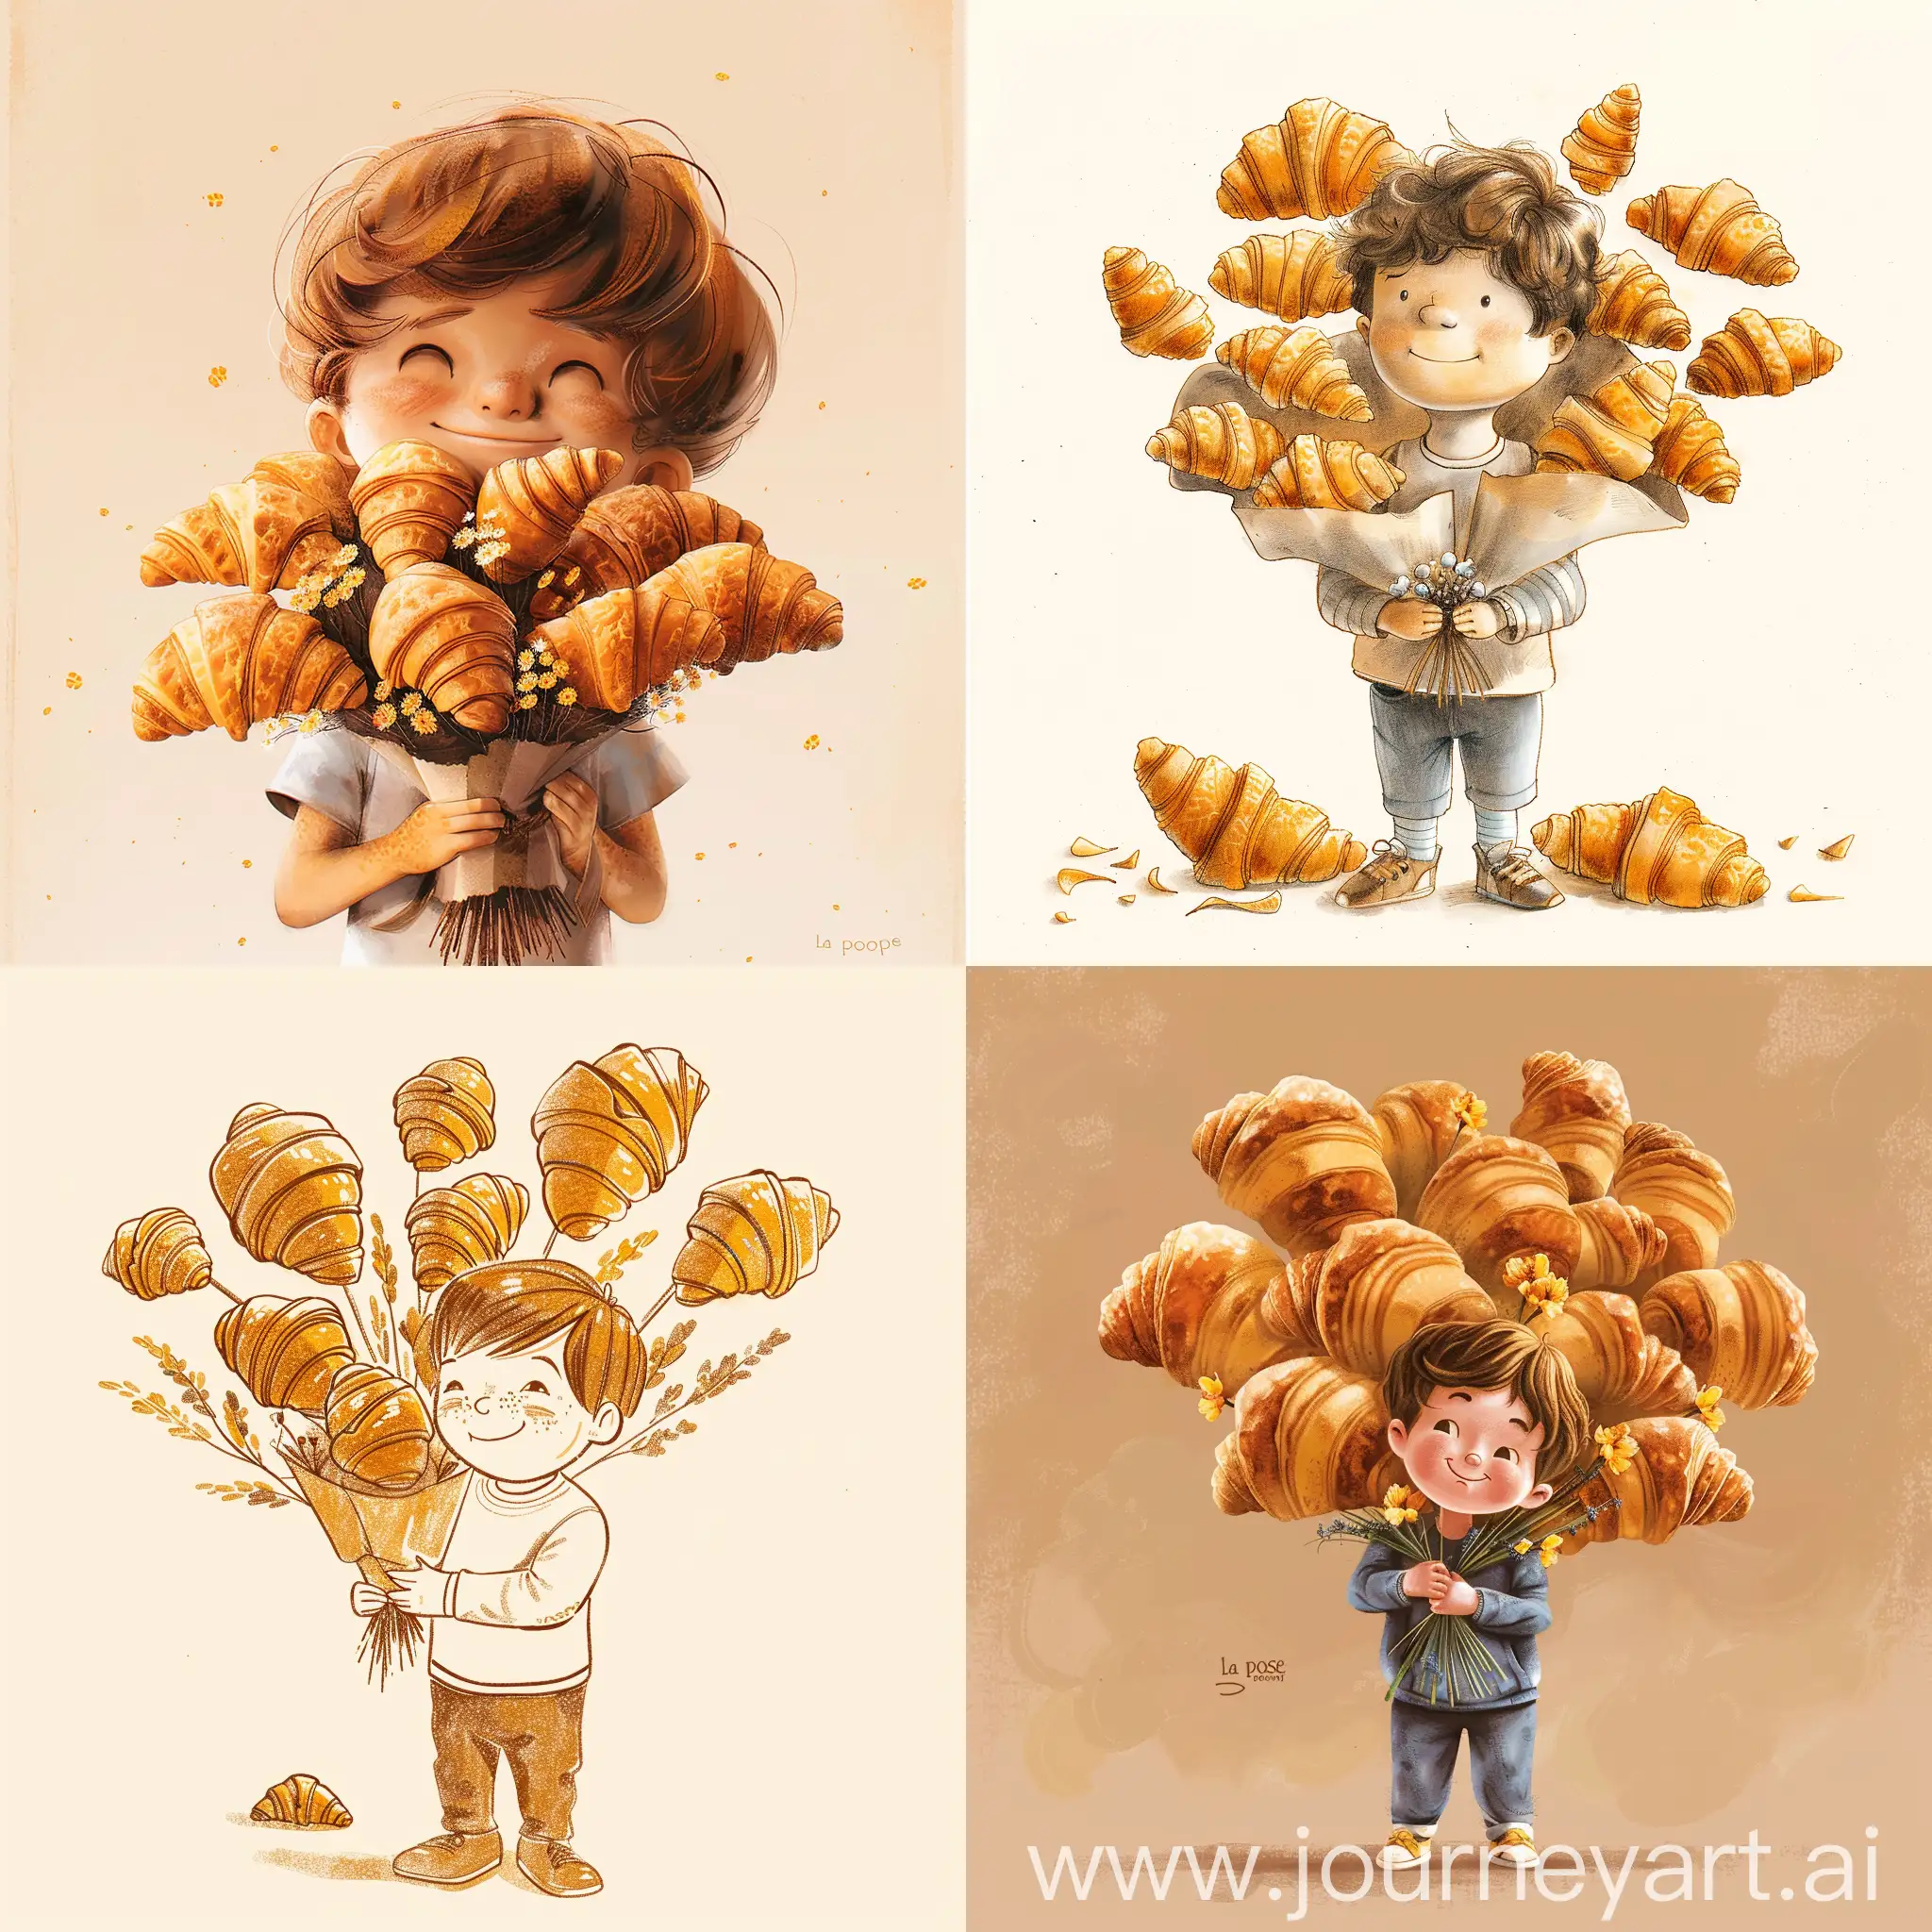 French-Bakery-Advertisement-Croissant-Bouquet-Held-by-Boy